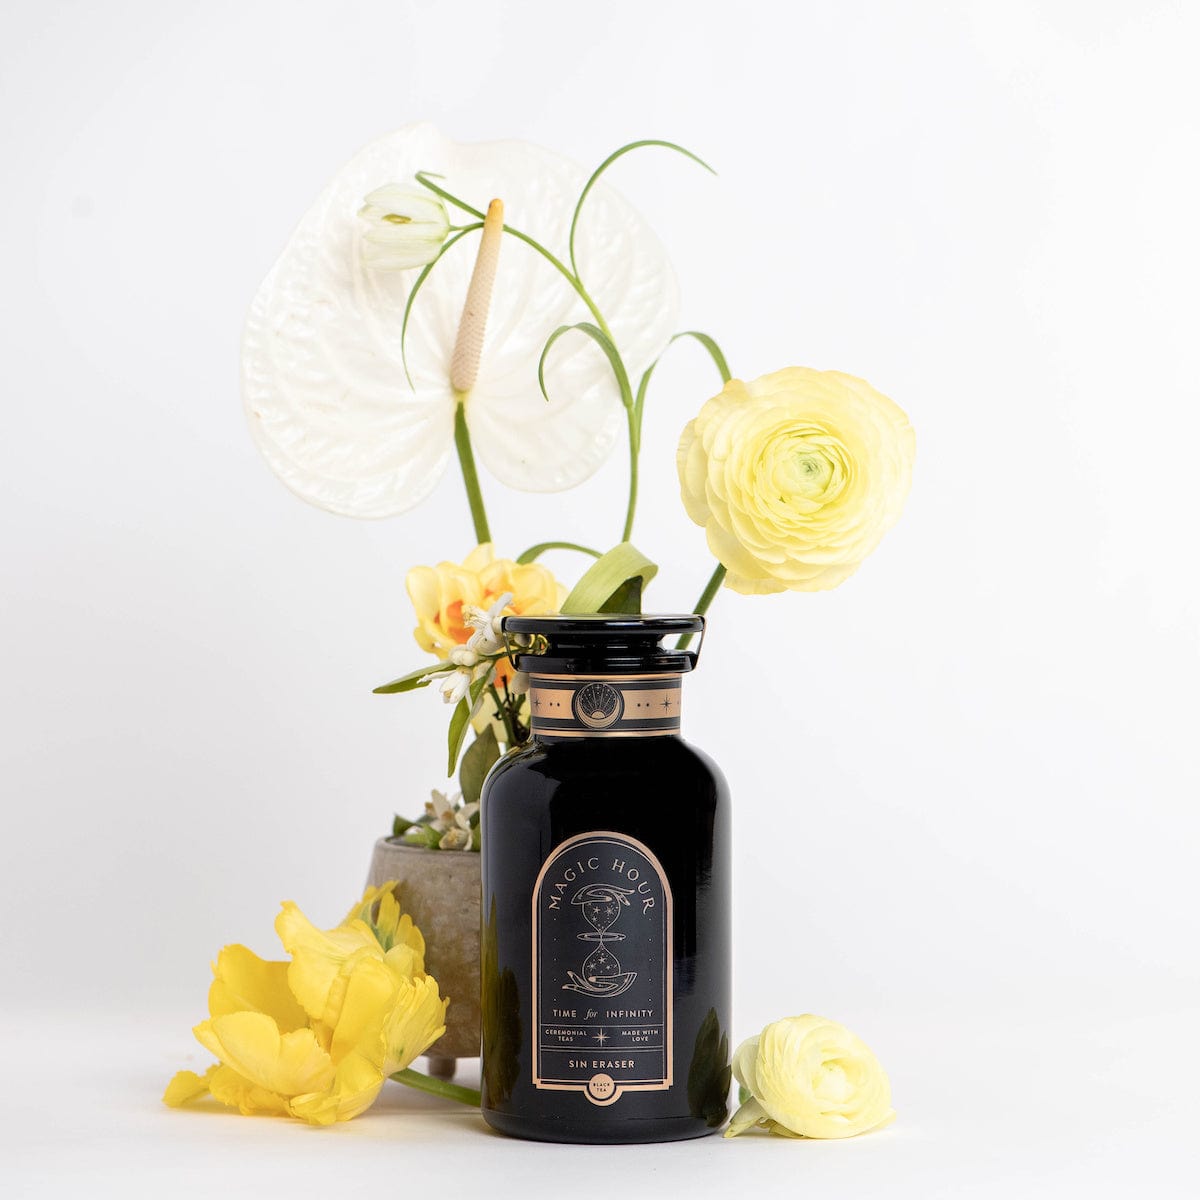 A black bottle labeled "Sin Eraser™ : Puerh Tea" by Magic Hour is surrounded by various flowers, including a white anthurium and yellow ranunculus, against a white background. The bottle has a gold-accented neck and the flowers visually frame it, adding an elegant touch.